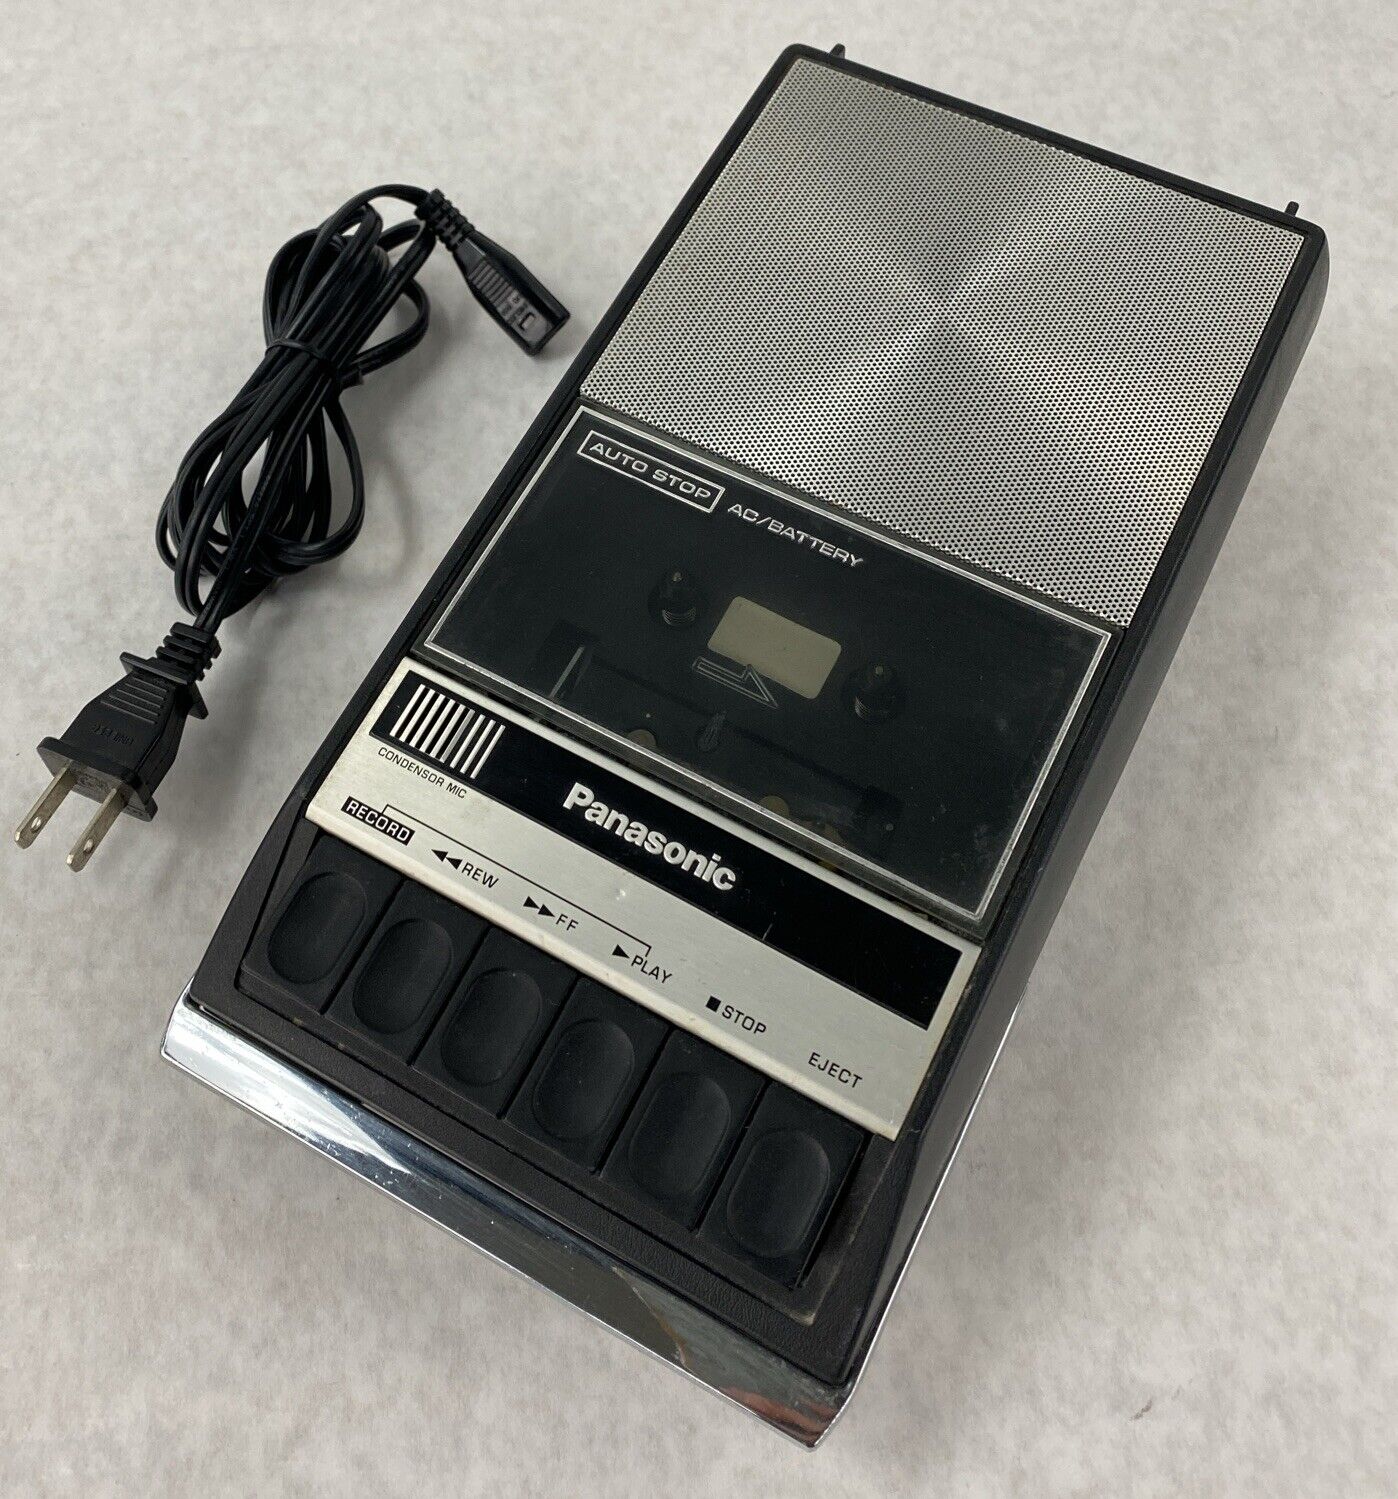 Panasonic RQ-309AS Cassette Tape Recorder Made in Japan FOR PARTS or REPAIR